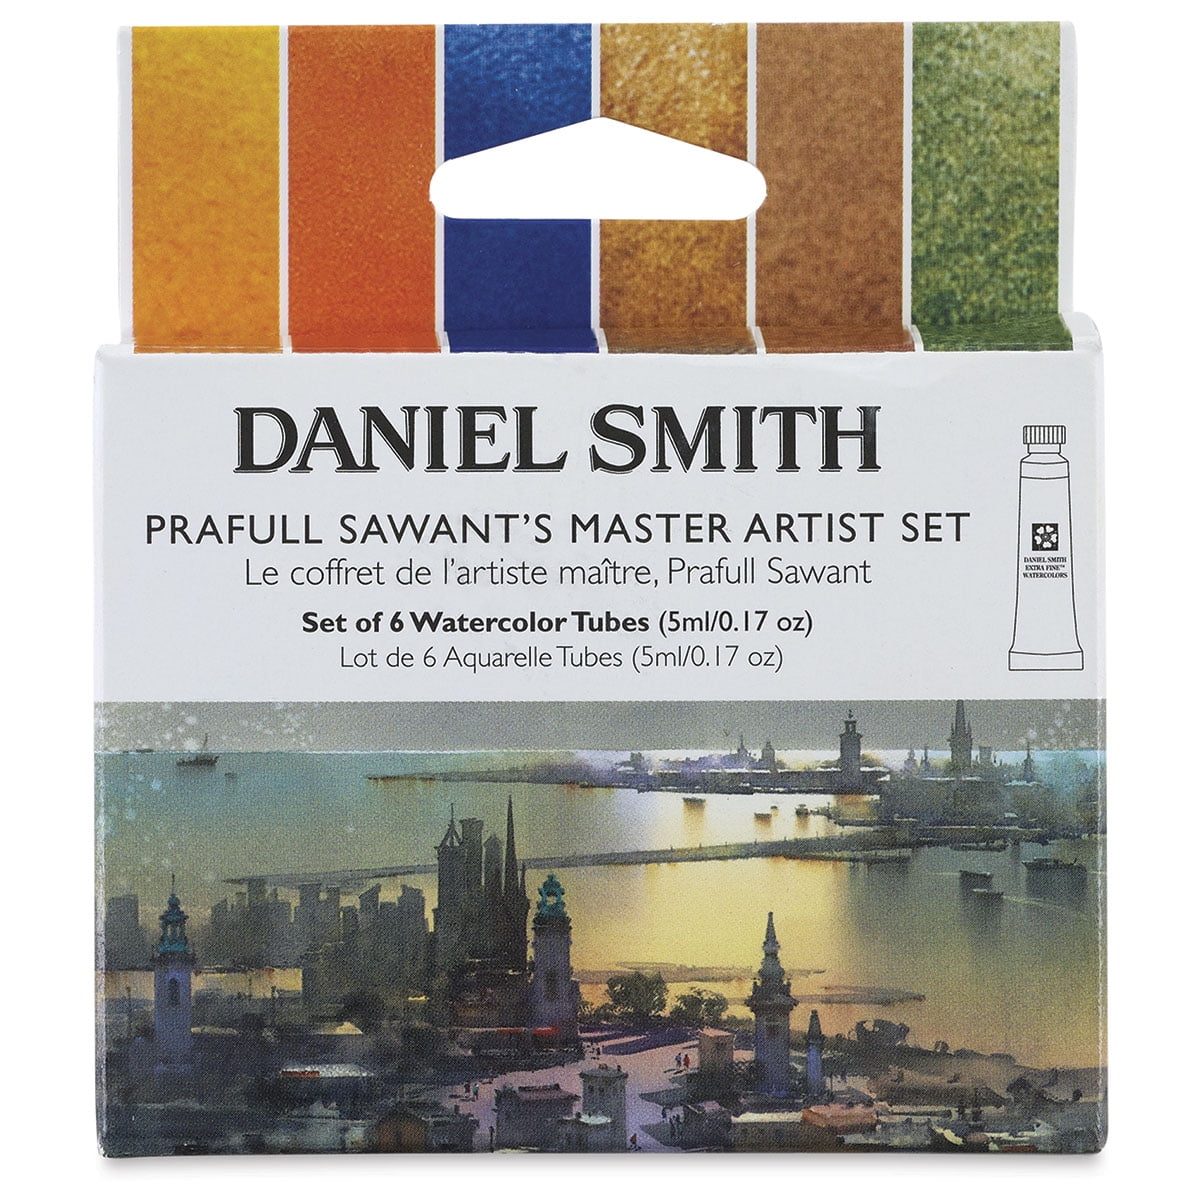 Daniel Smith Watercolor Ground - Sampler Set of 5 - 4oz Jars for Using Watercolors on Any Surface Mars Black, Pearlescent White, Buff Titanium